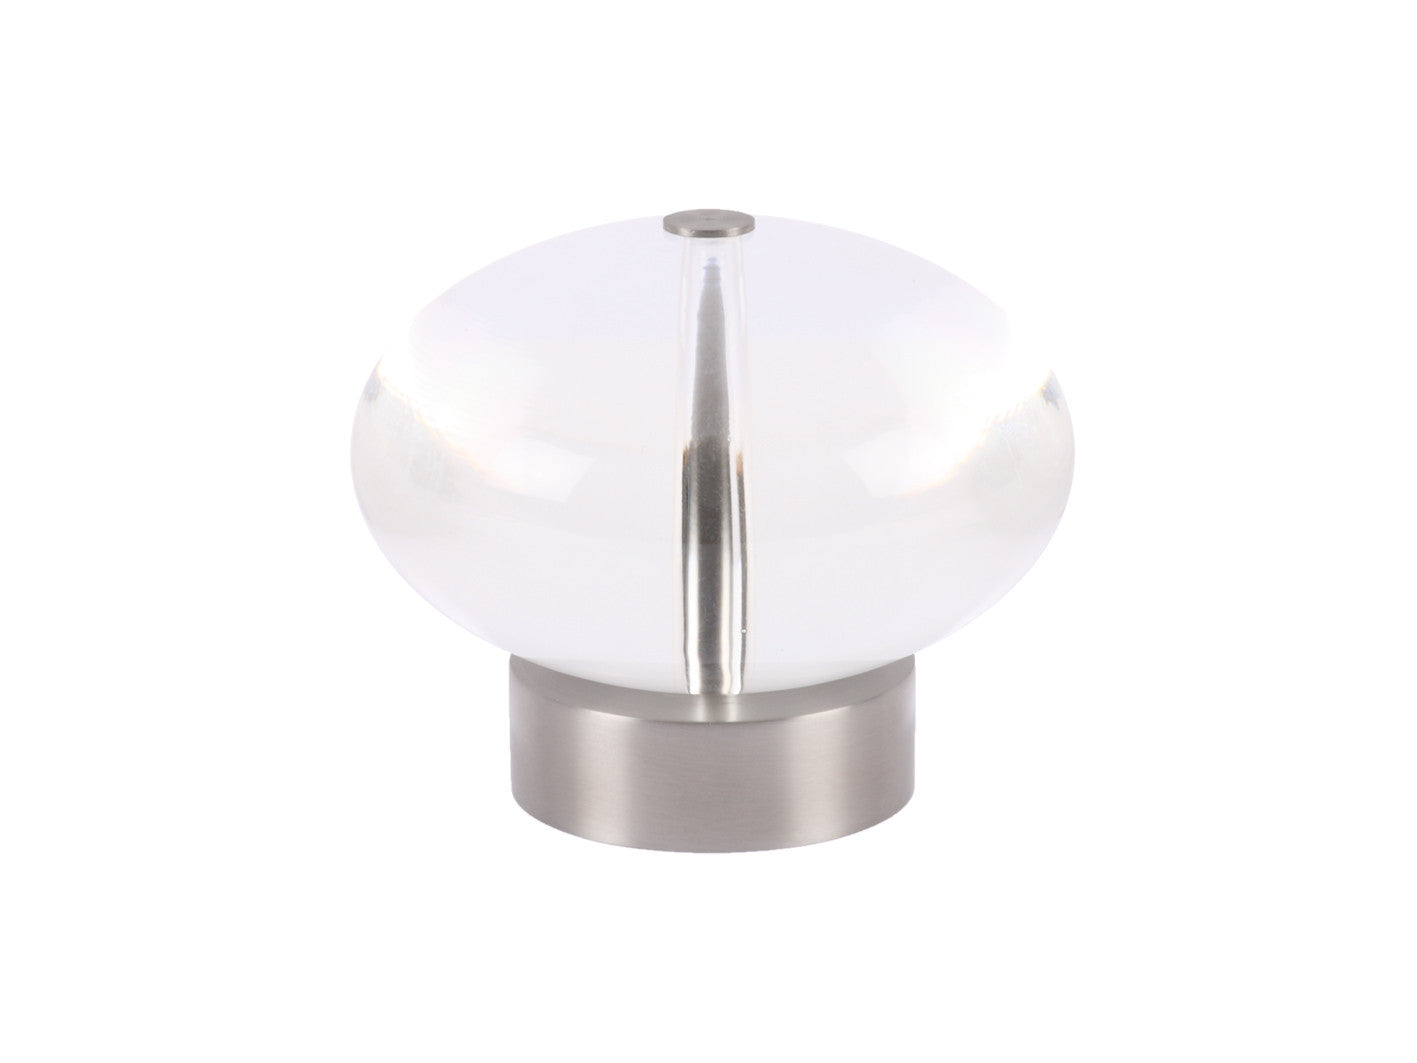 Acrylic ellipse finial in stainless steel curtain pole end